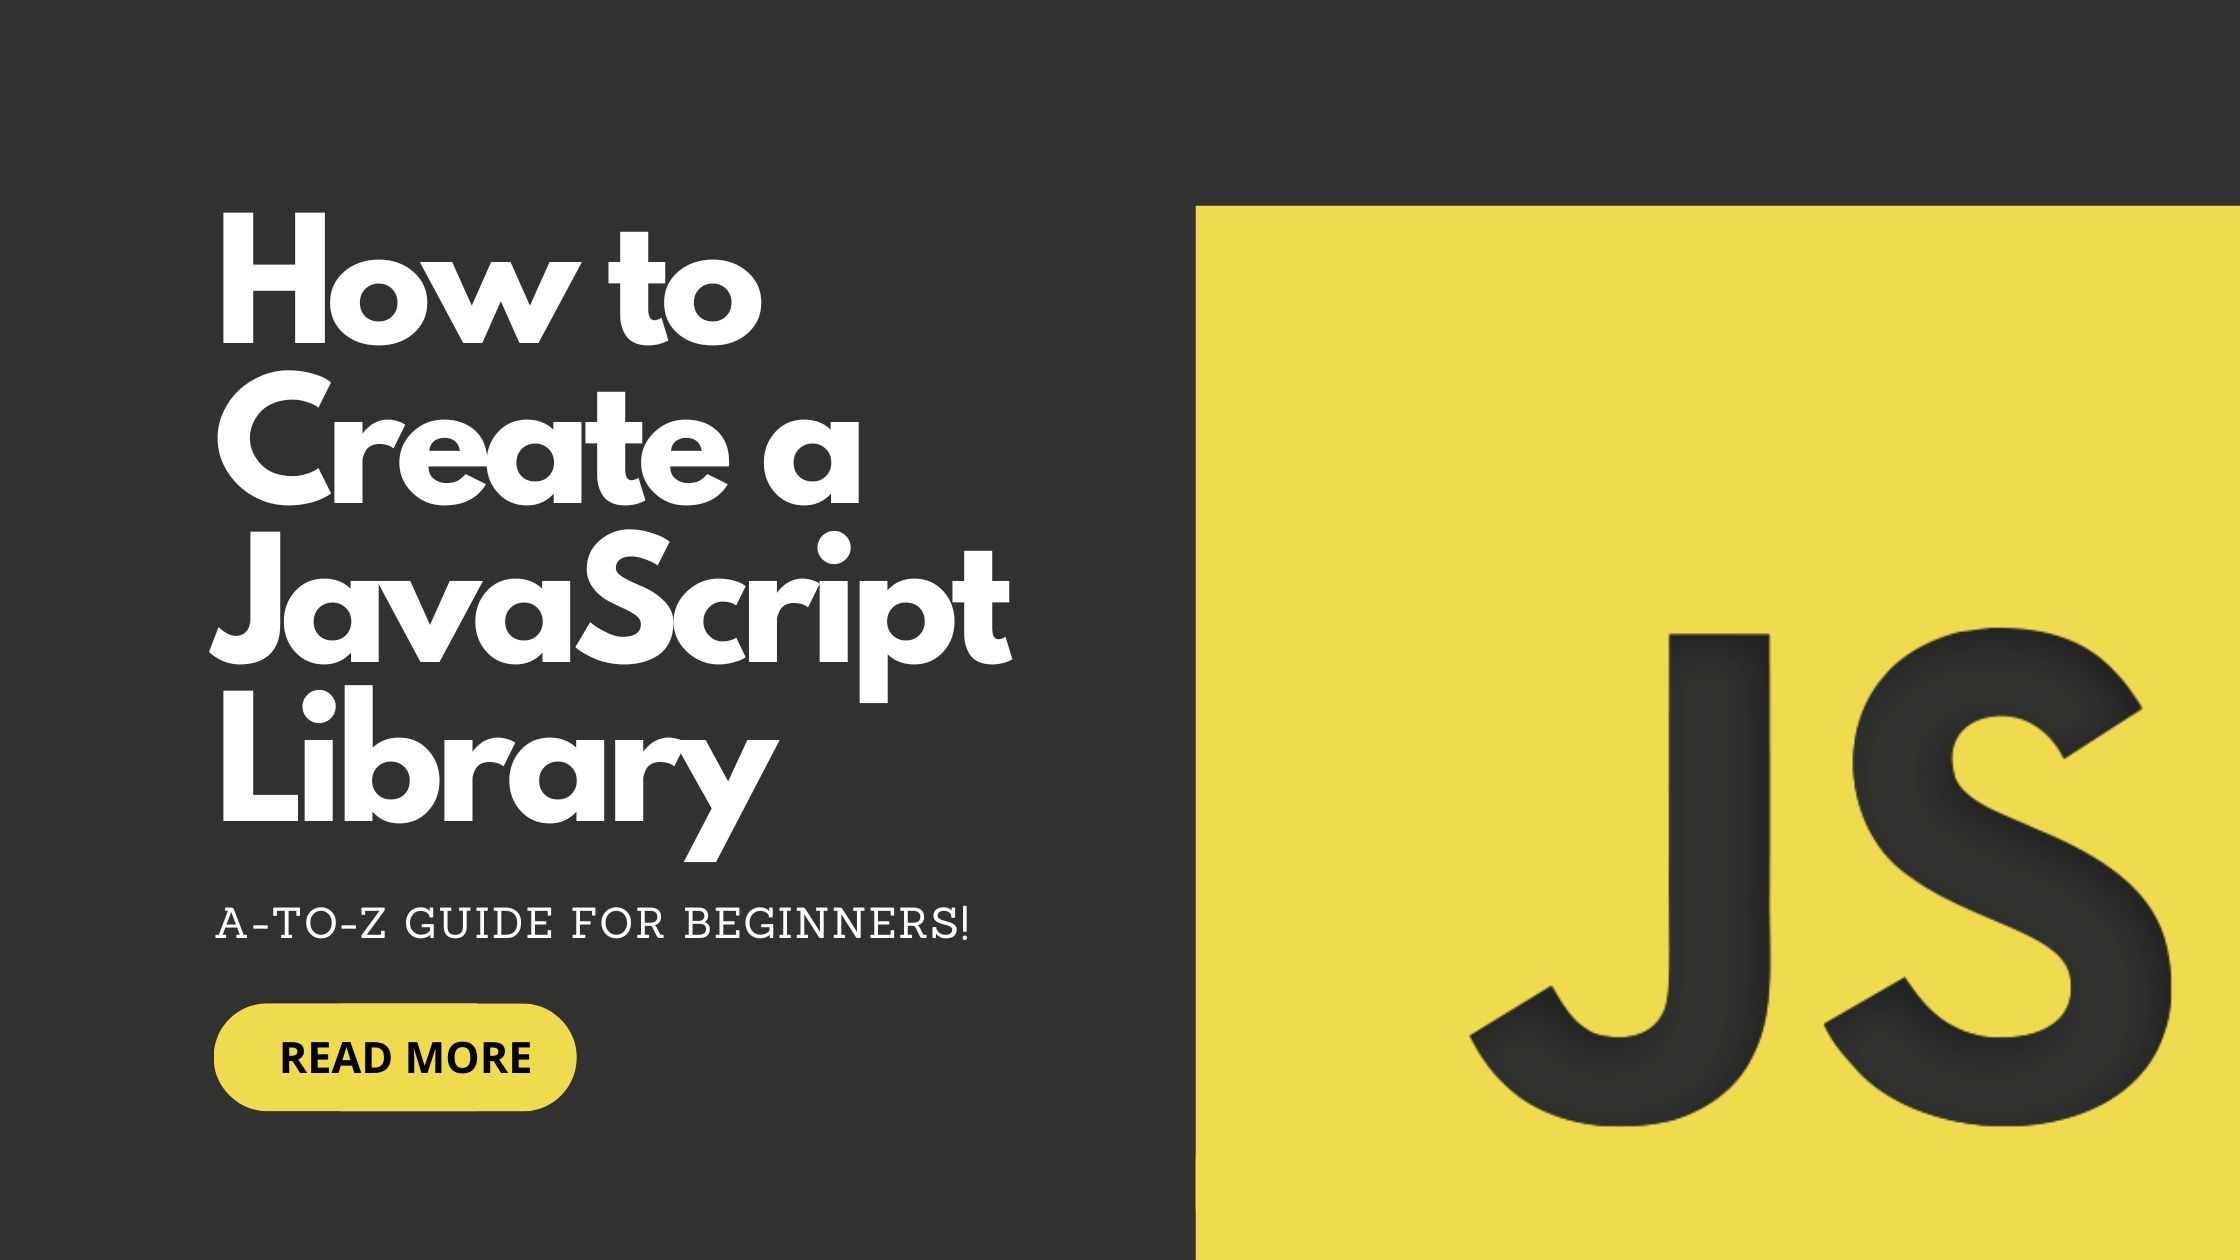 How to Create a JavaScript Library